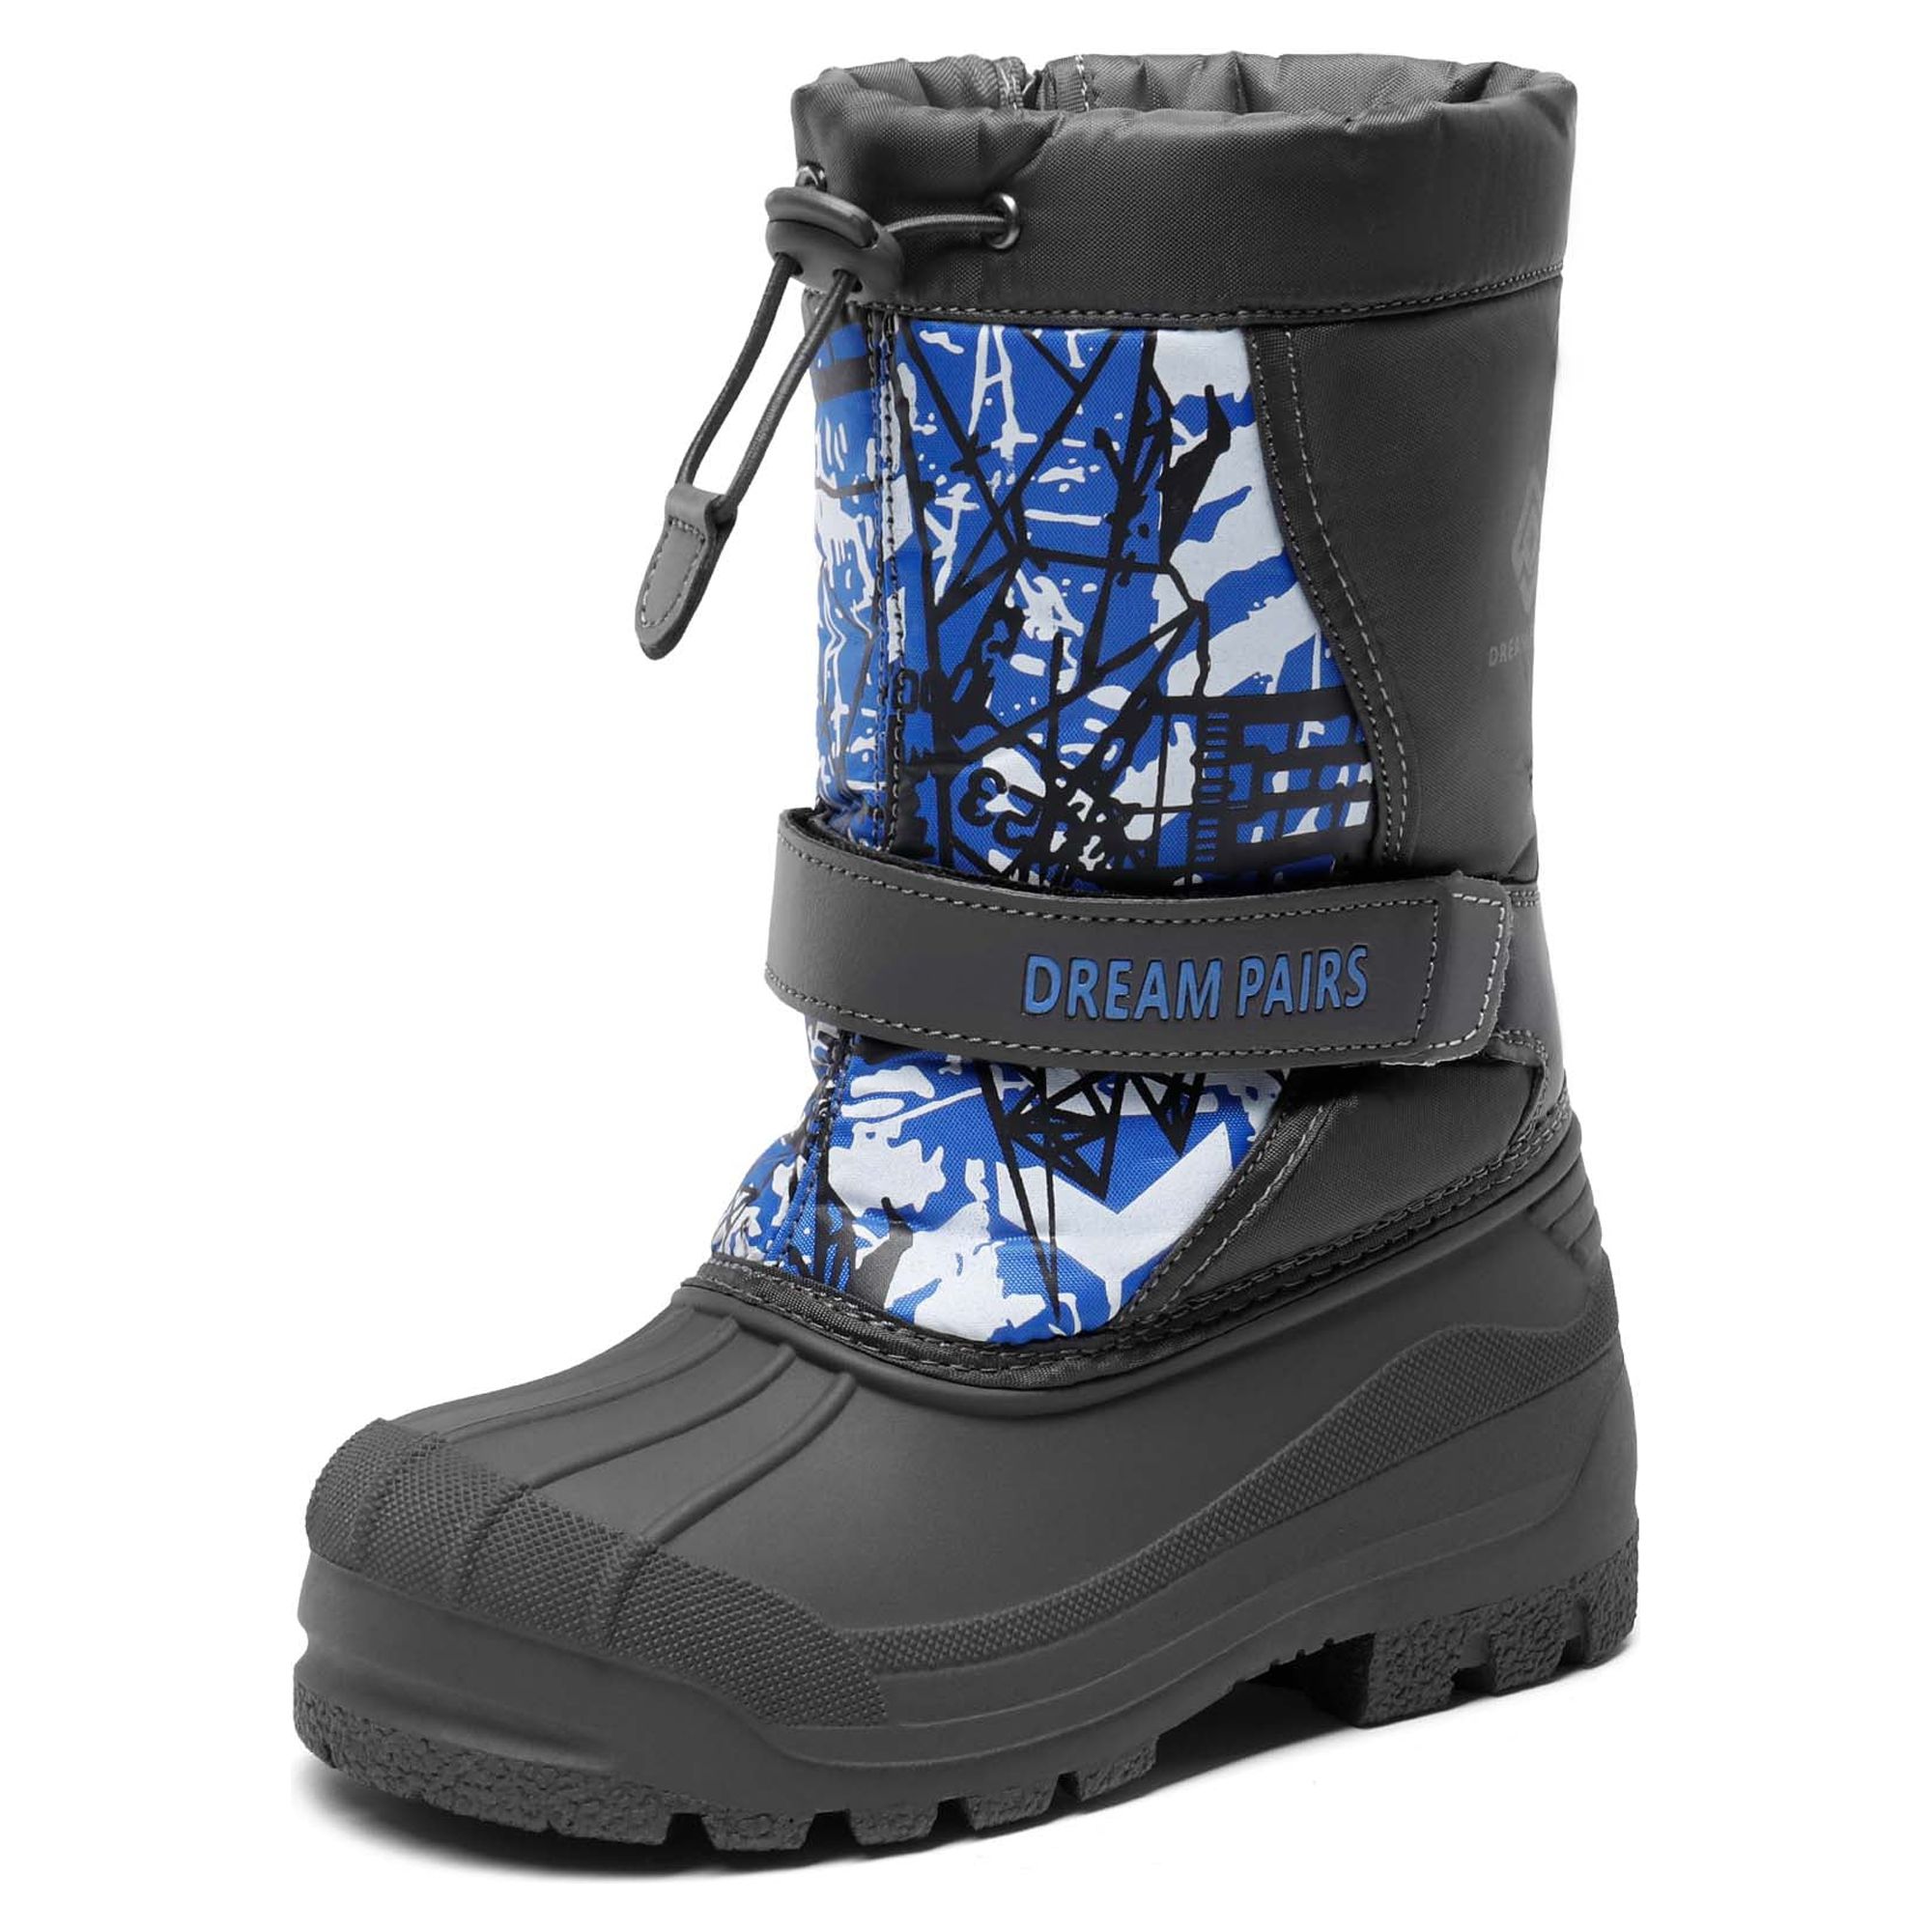 Dream Pairs Big Kid Boys & Girls Mid Calf Waterproof Winter Snow Boots KAMICK. color NAVY, size 1. - image 1 of 6